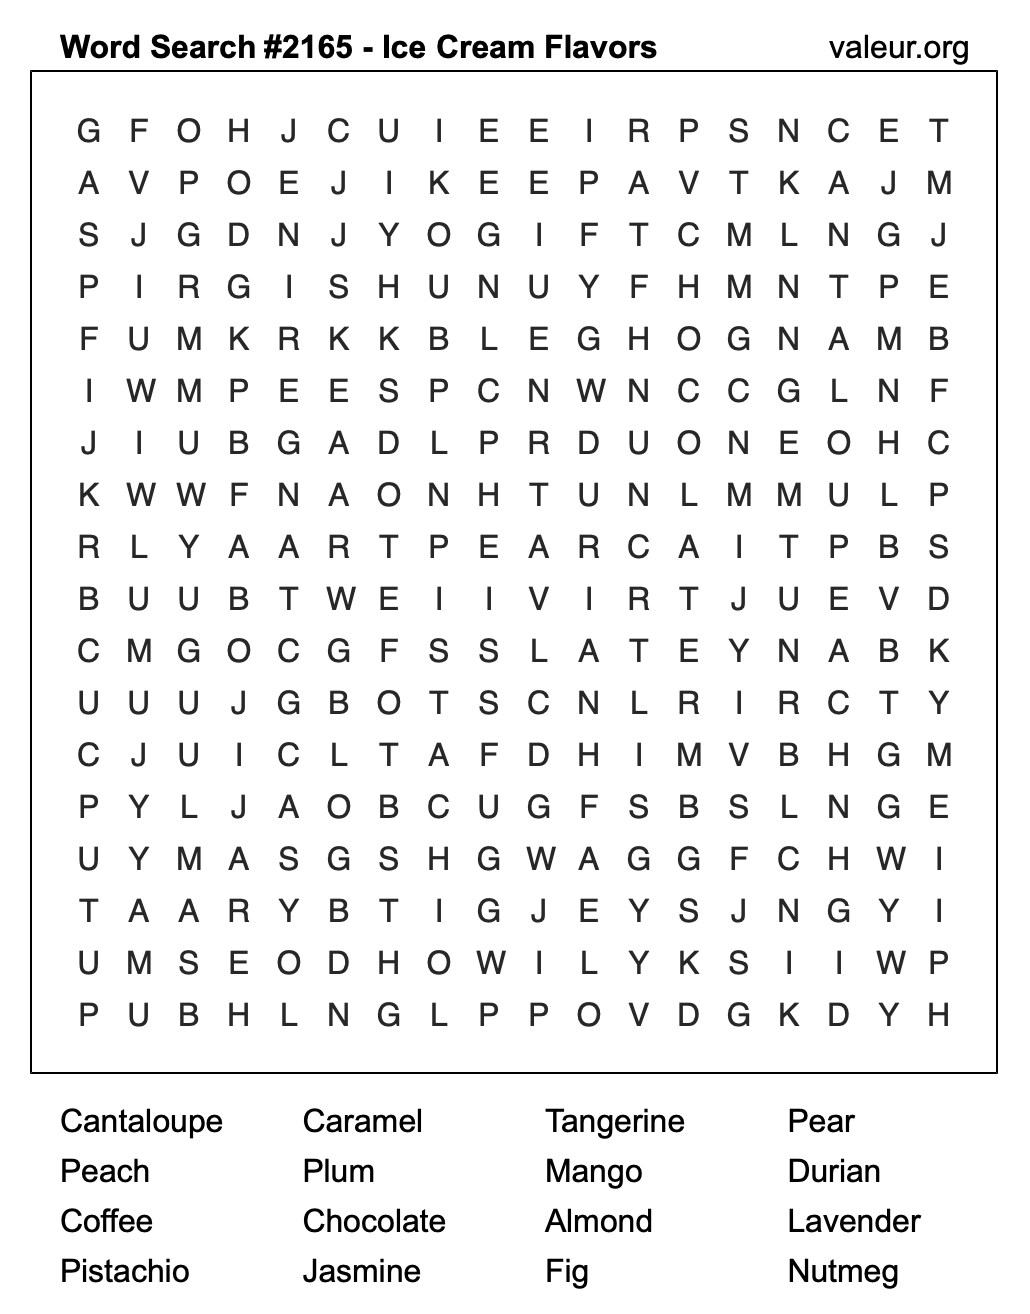 Word Search Puzzle with Ice Cream Flavors #2165